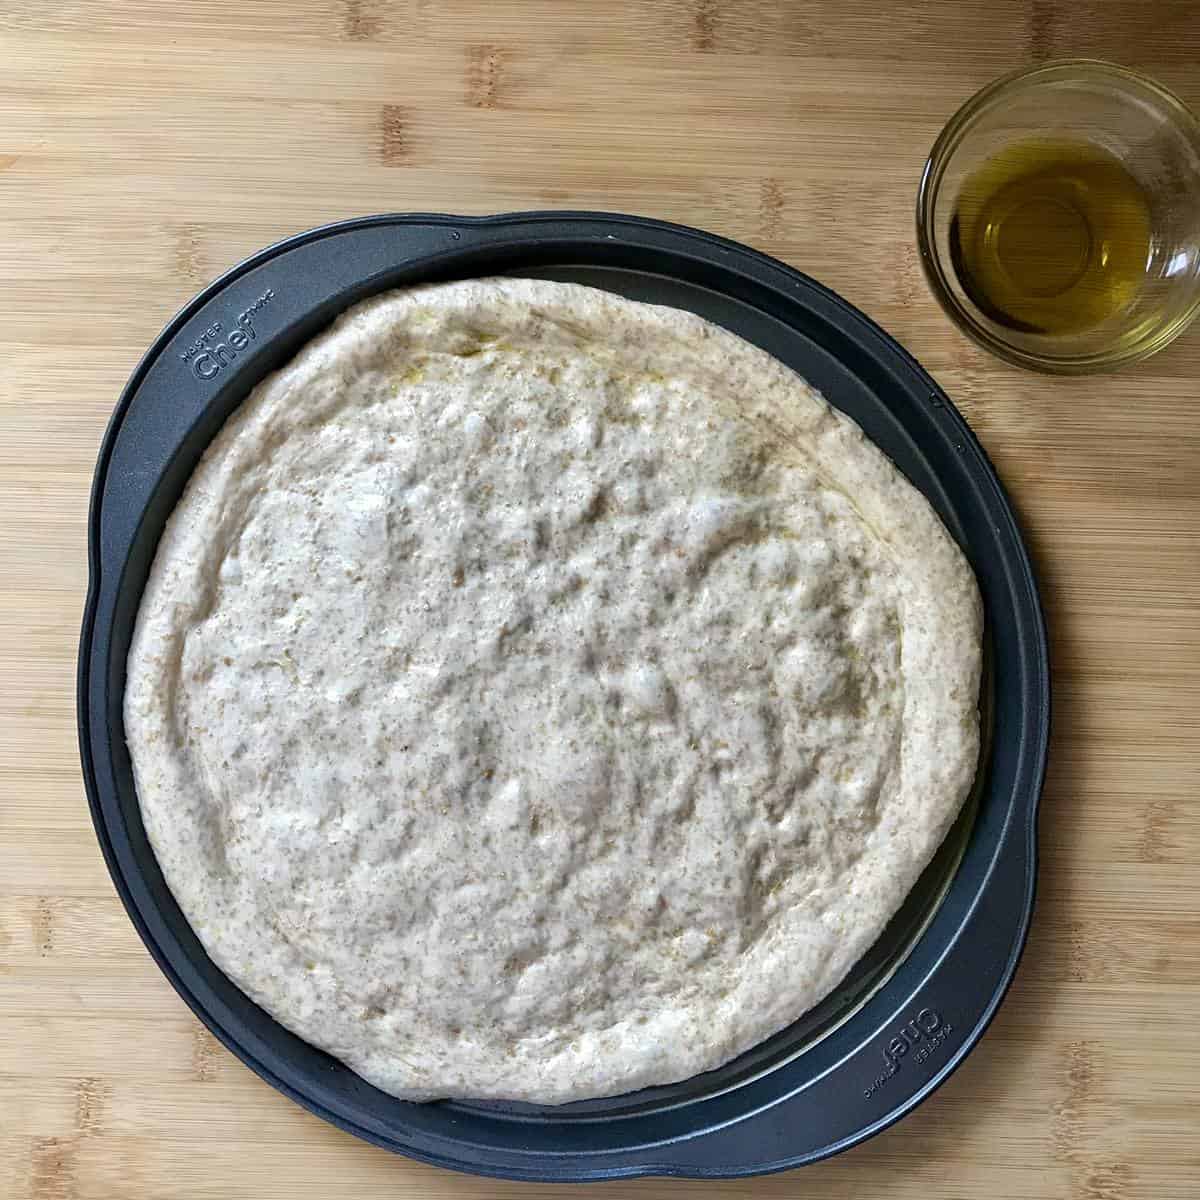 Stretched out pizza dough in a round pizza pan.